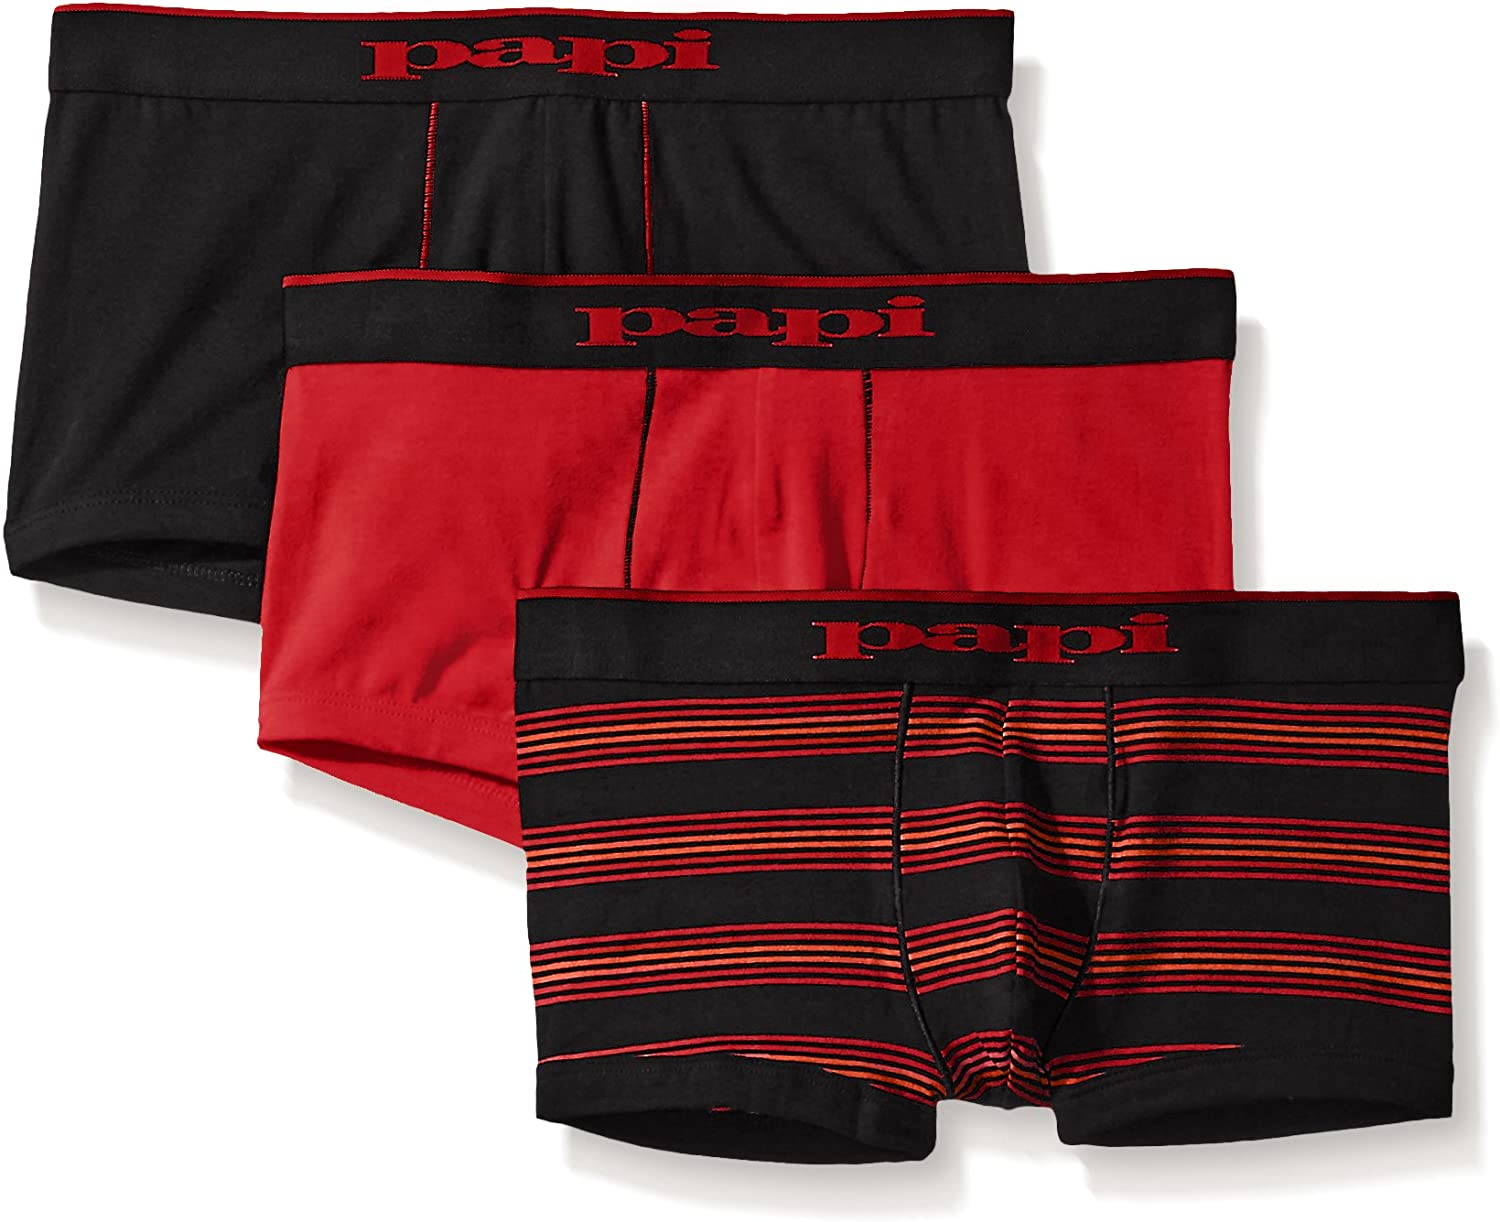 papi Men's Stylish Brazilian Solid and Print Trunks (3-Pack of